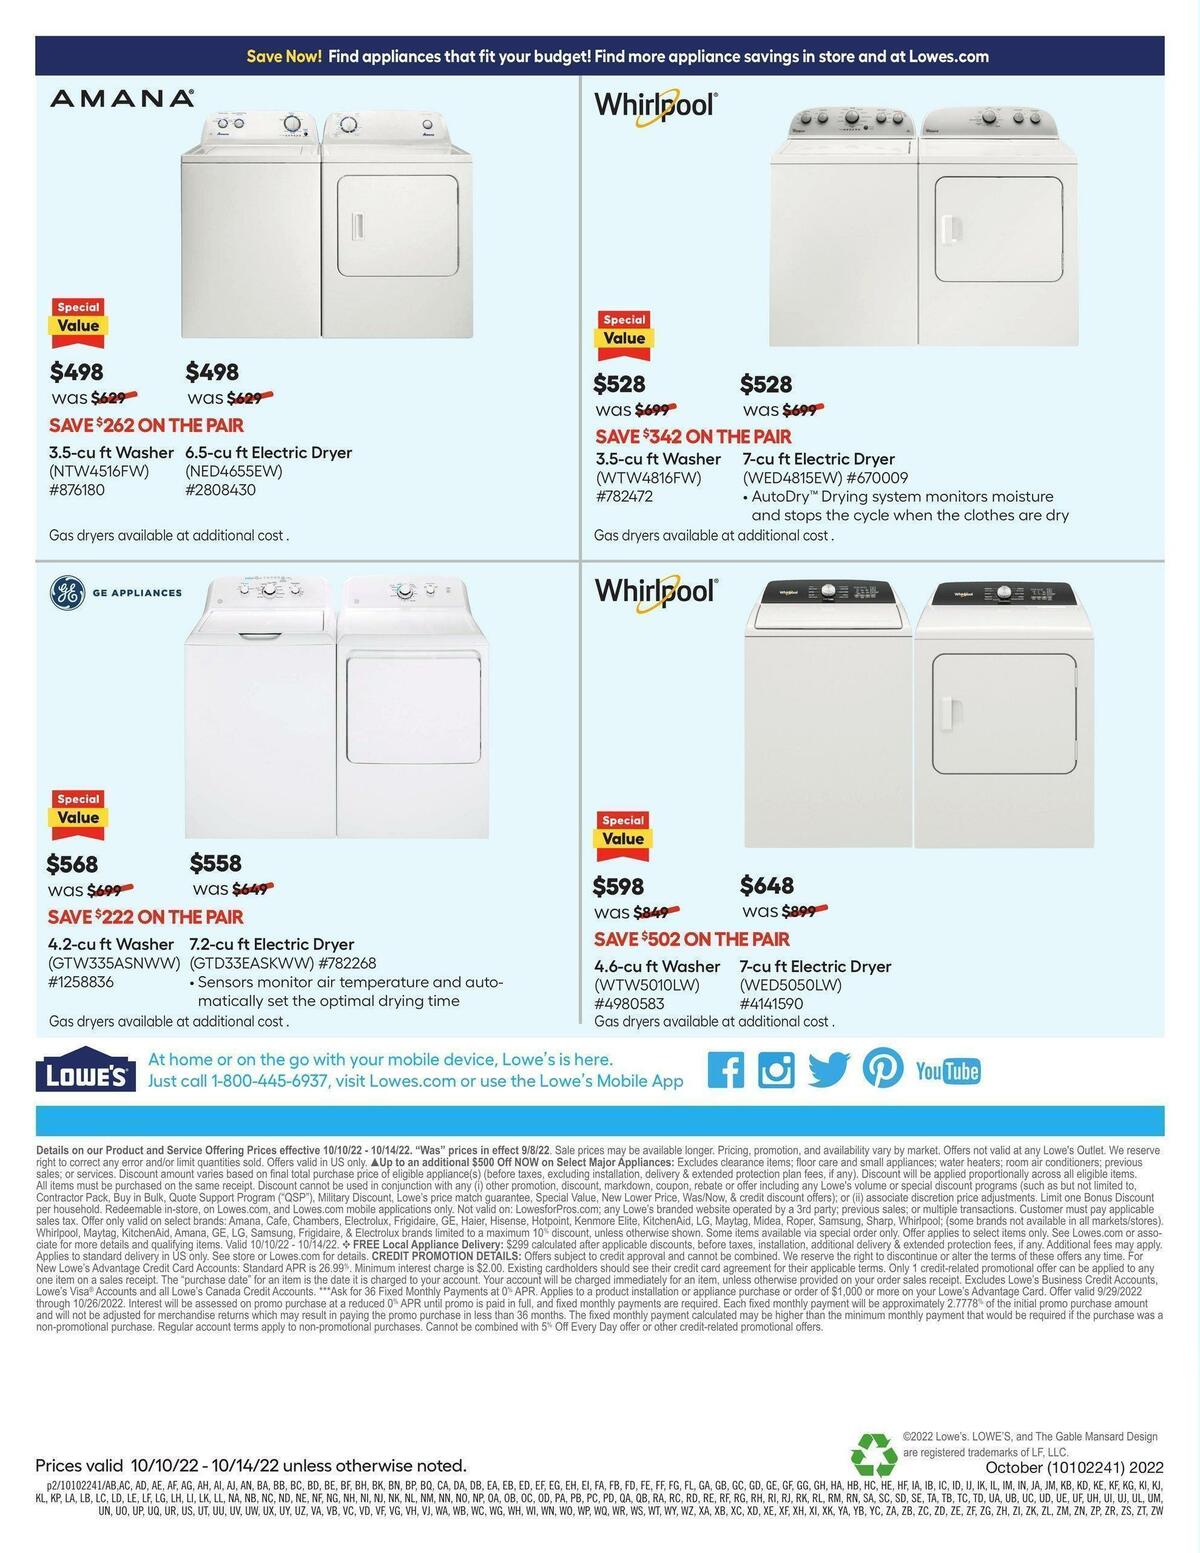 Lowe's Pro Ad - Appliances Weekly Ad from October 10